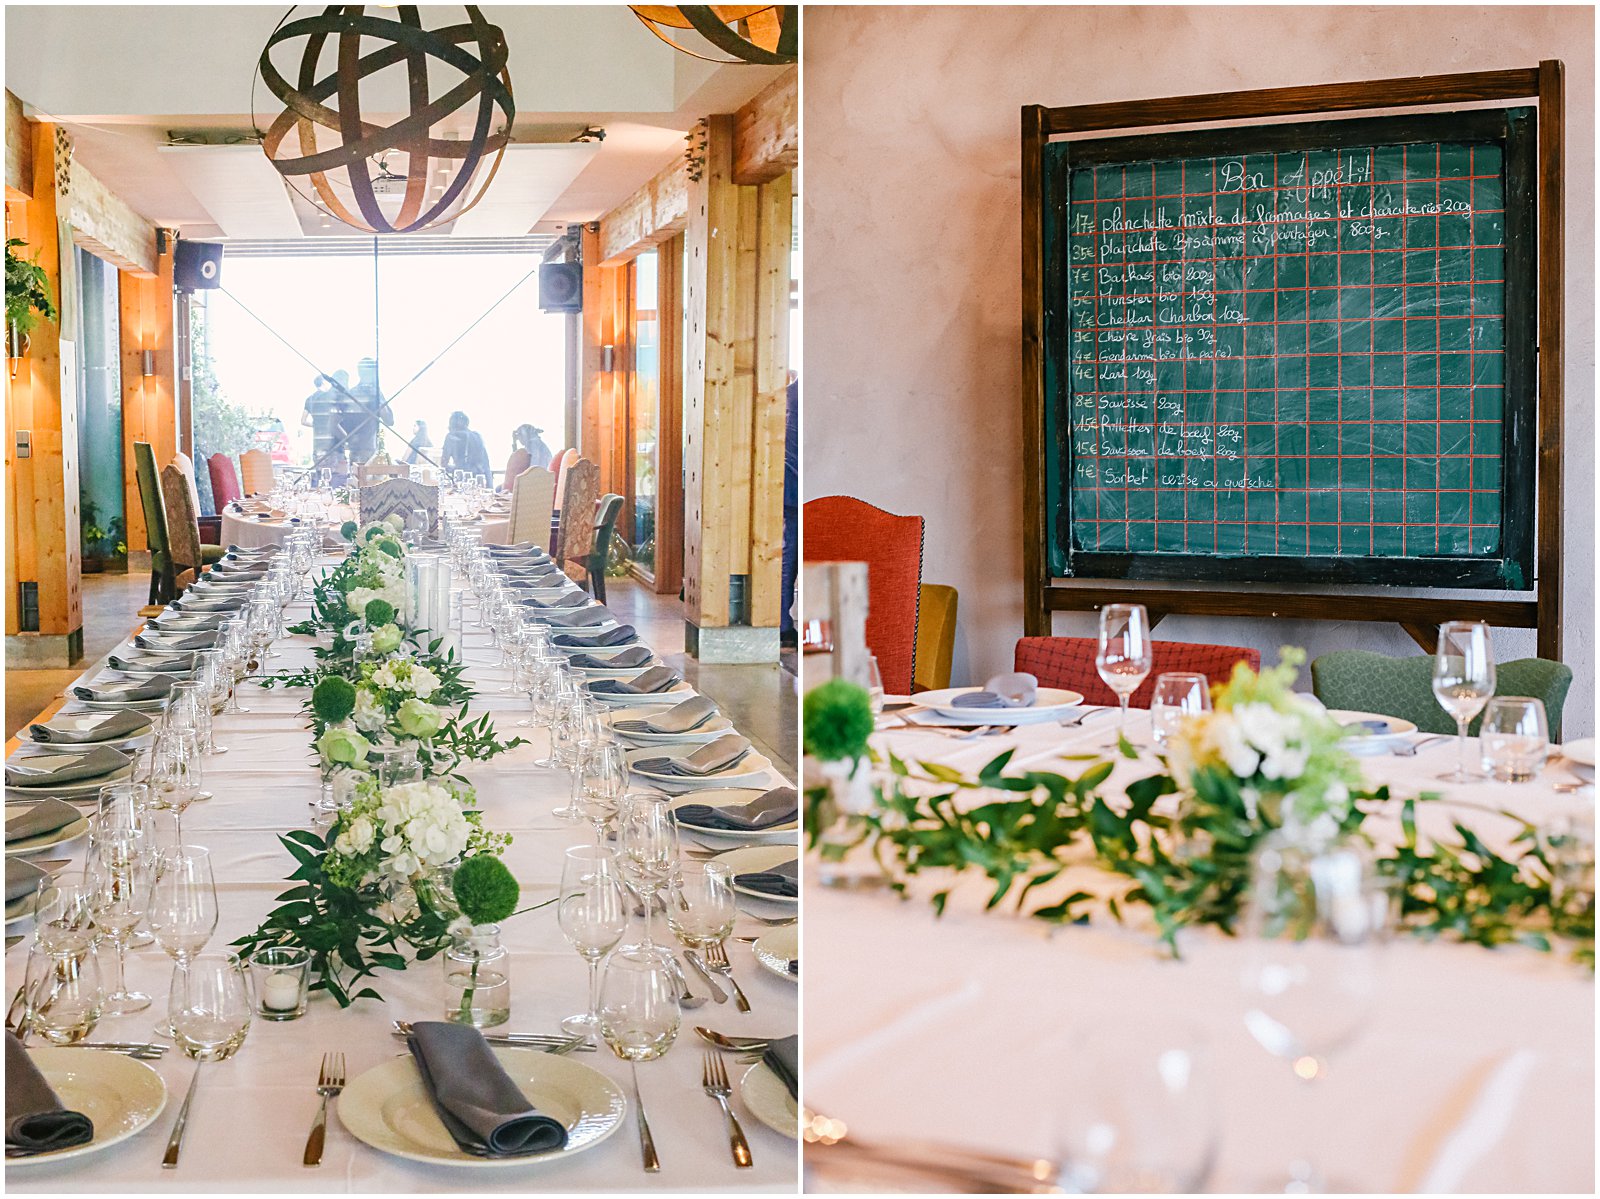 Reception at Achilles Domaine Winery and Vineyards wedding in Alsace France photographed by Helena Woods